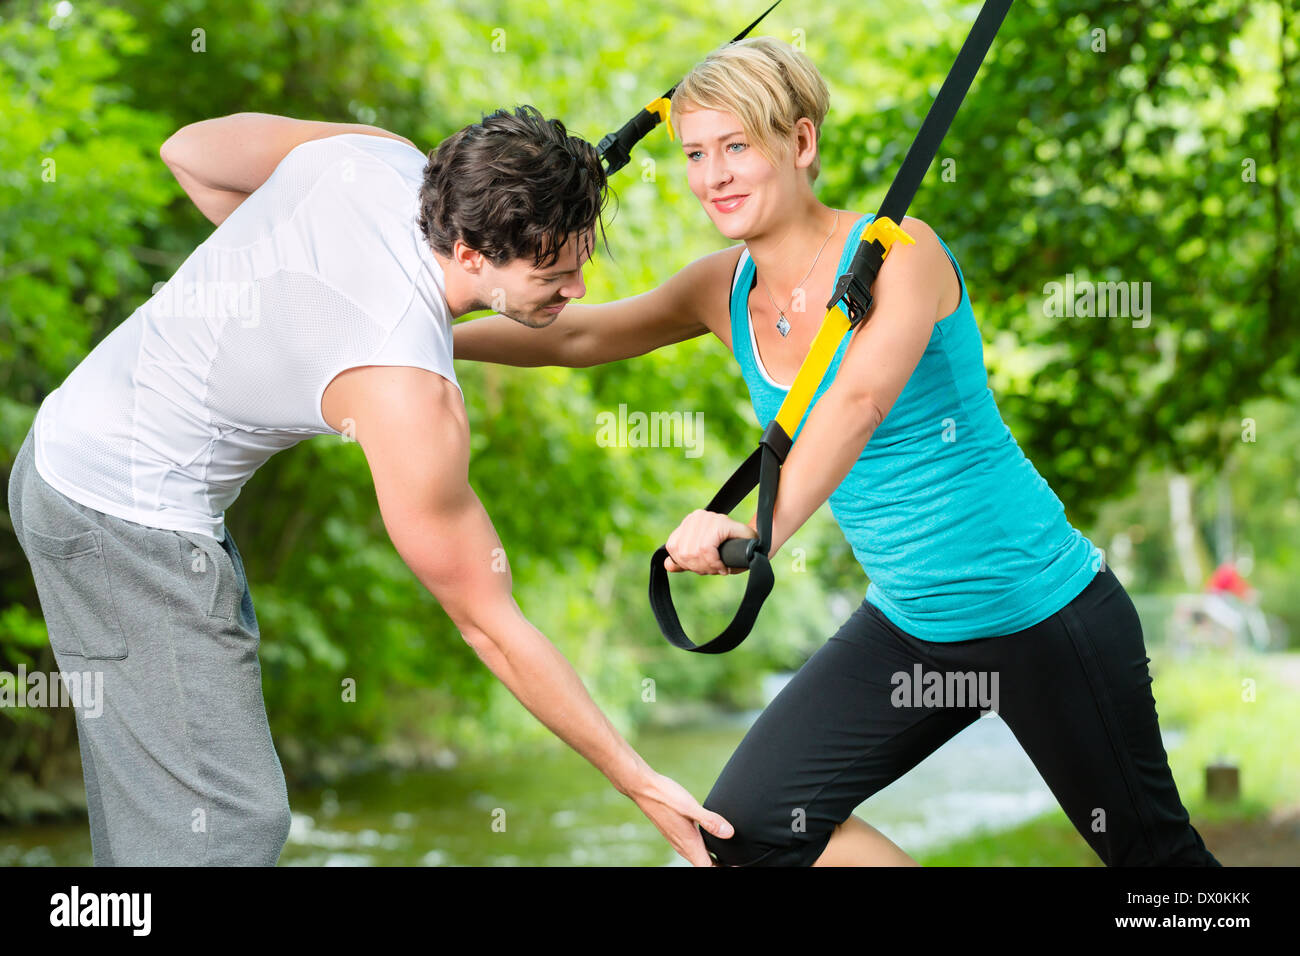 Fitness woman exercising with suspension trainer and personal sport trainer in City Park under summer trees Stock Photo